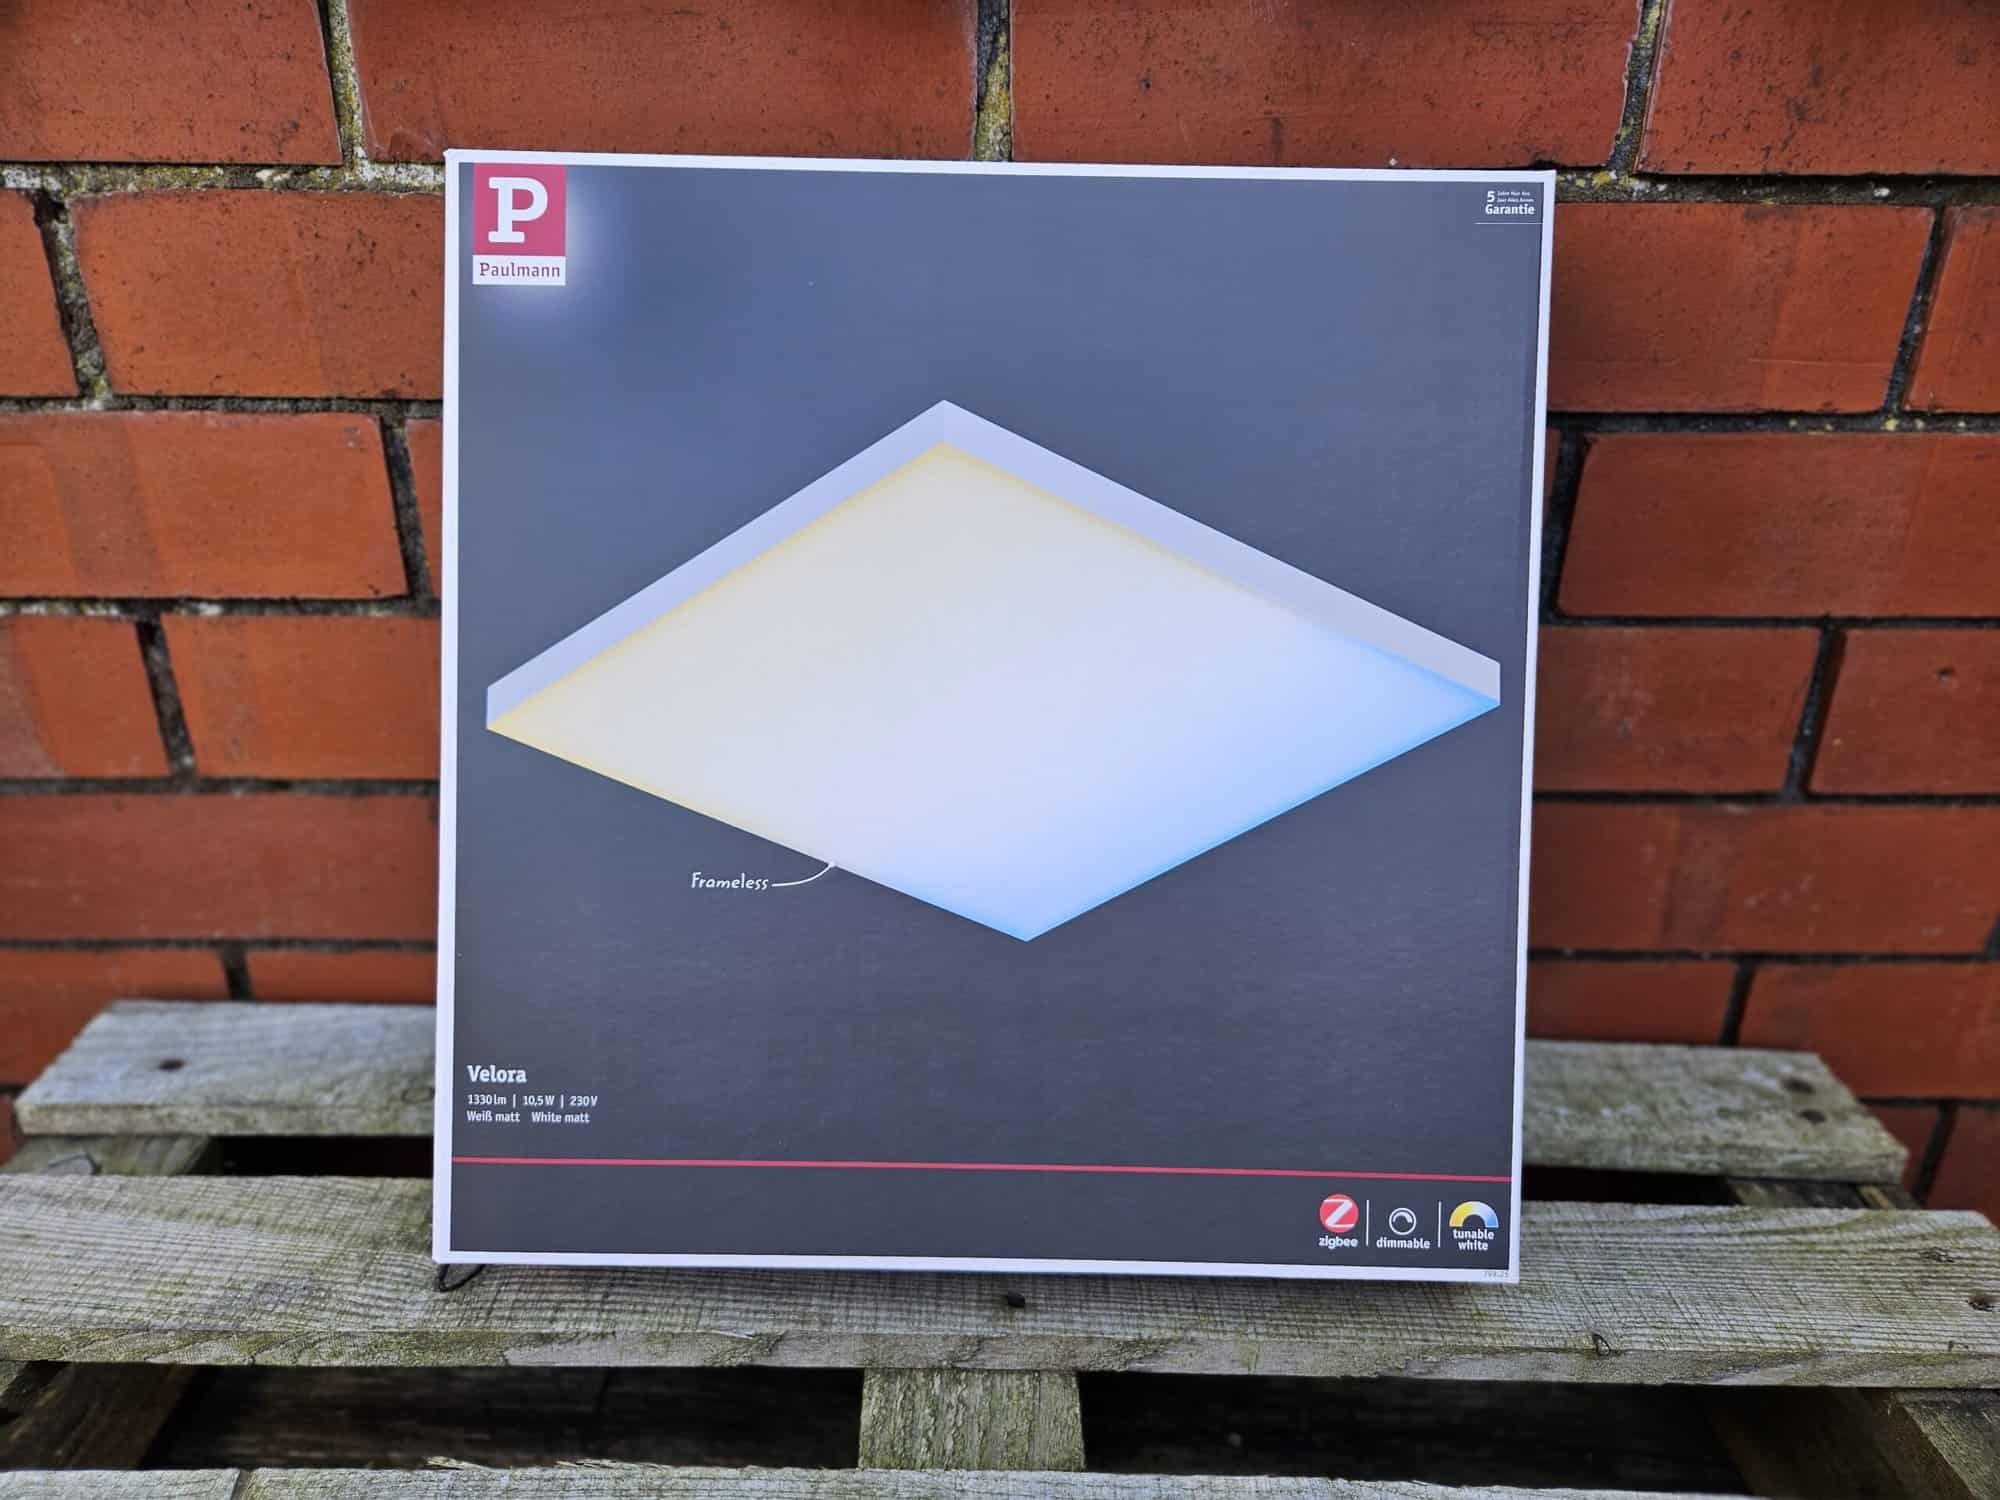 Paulmann Velora Zigbee Smart LED Panel Review: Tunable White Dimmable 1100lm Panel that works with Philips Hue